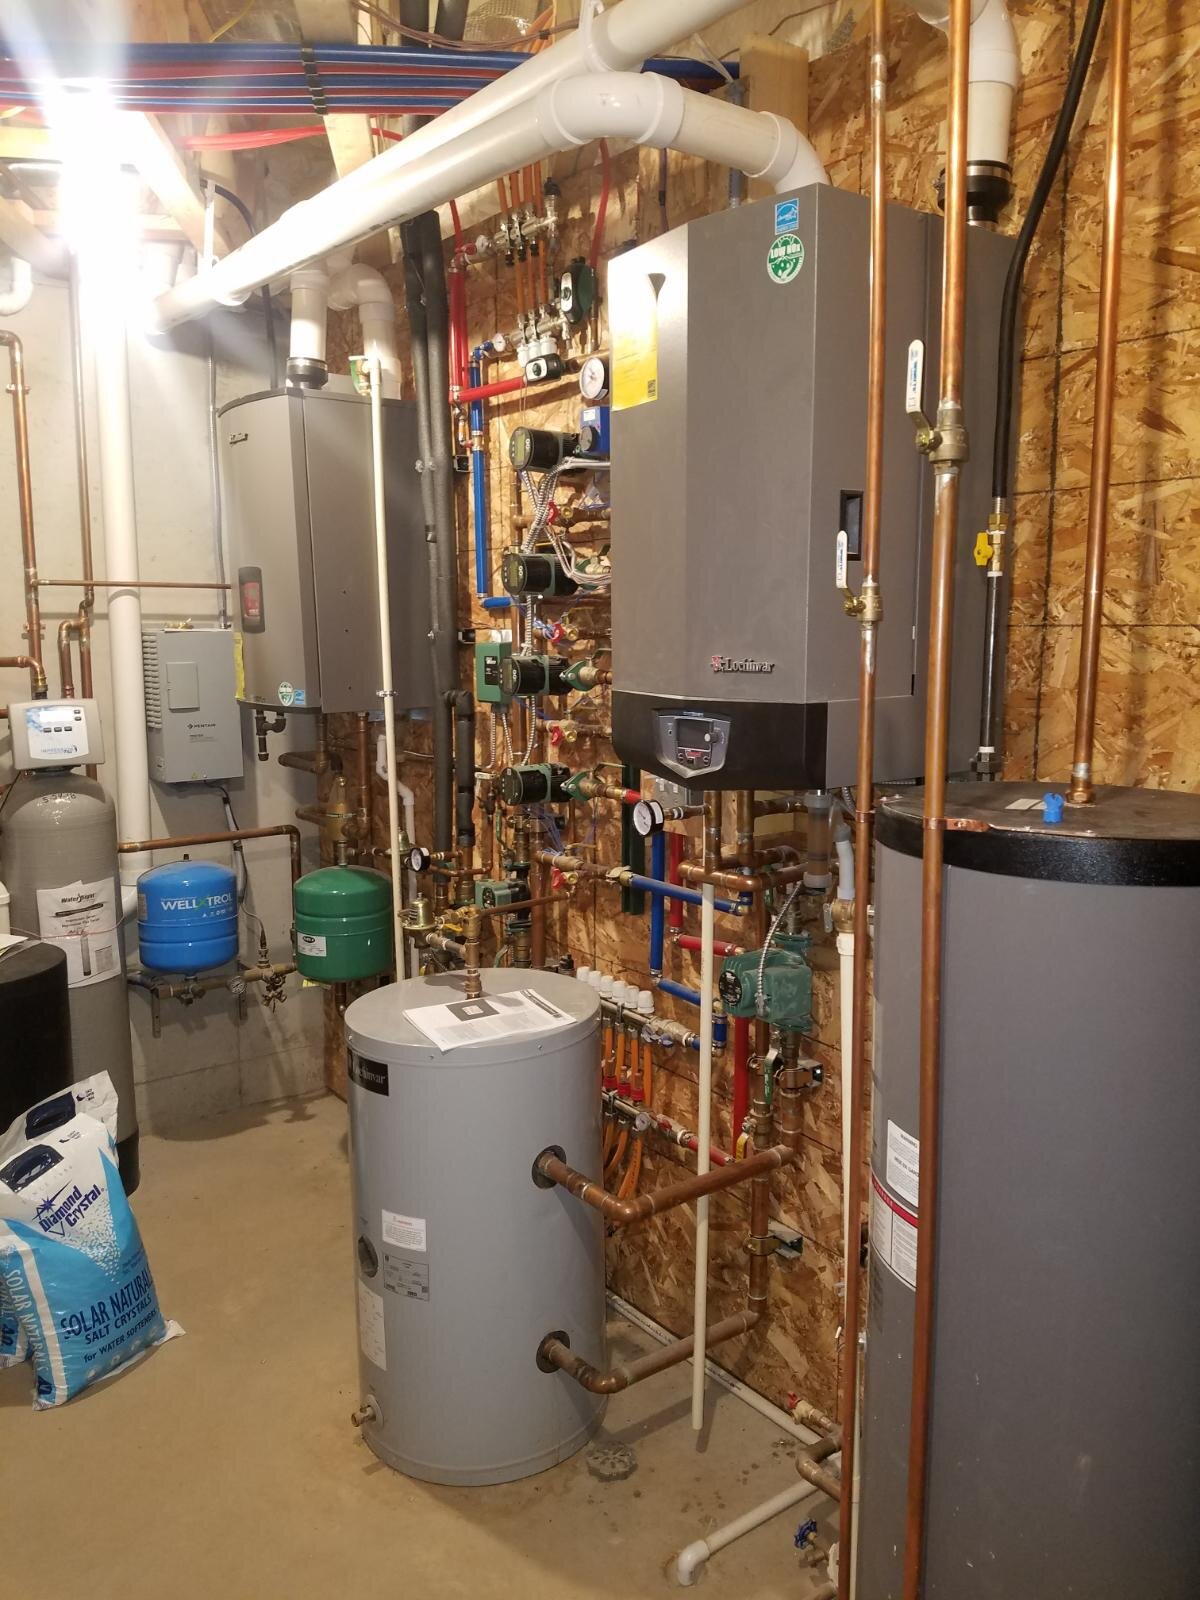  This residential heating system provides comfort while saving money. This high-efficiency modern boiler system not only provides in-floor heat to multiple independent zones in the house, but also has an air stage to make the system more responsive. 